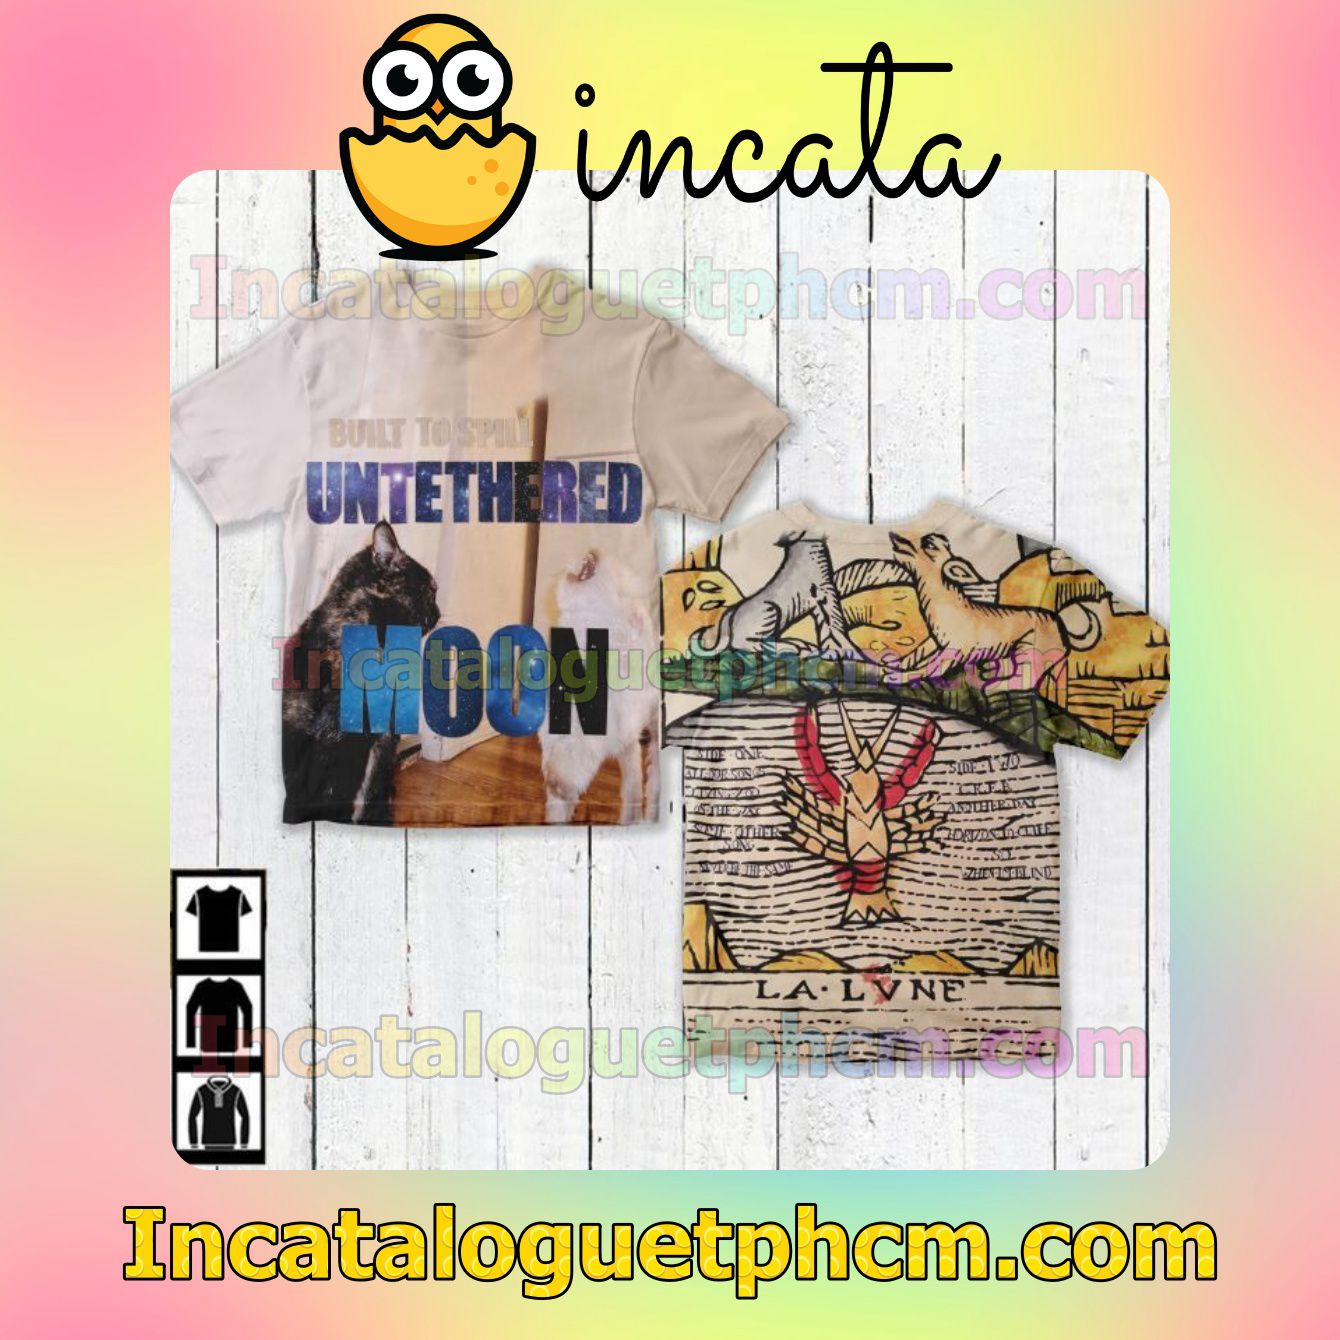 Built To Spill Untethered Moon Album Cover Fan Gift Shirt